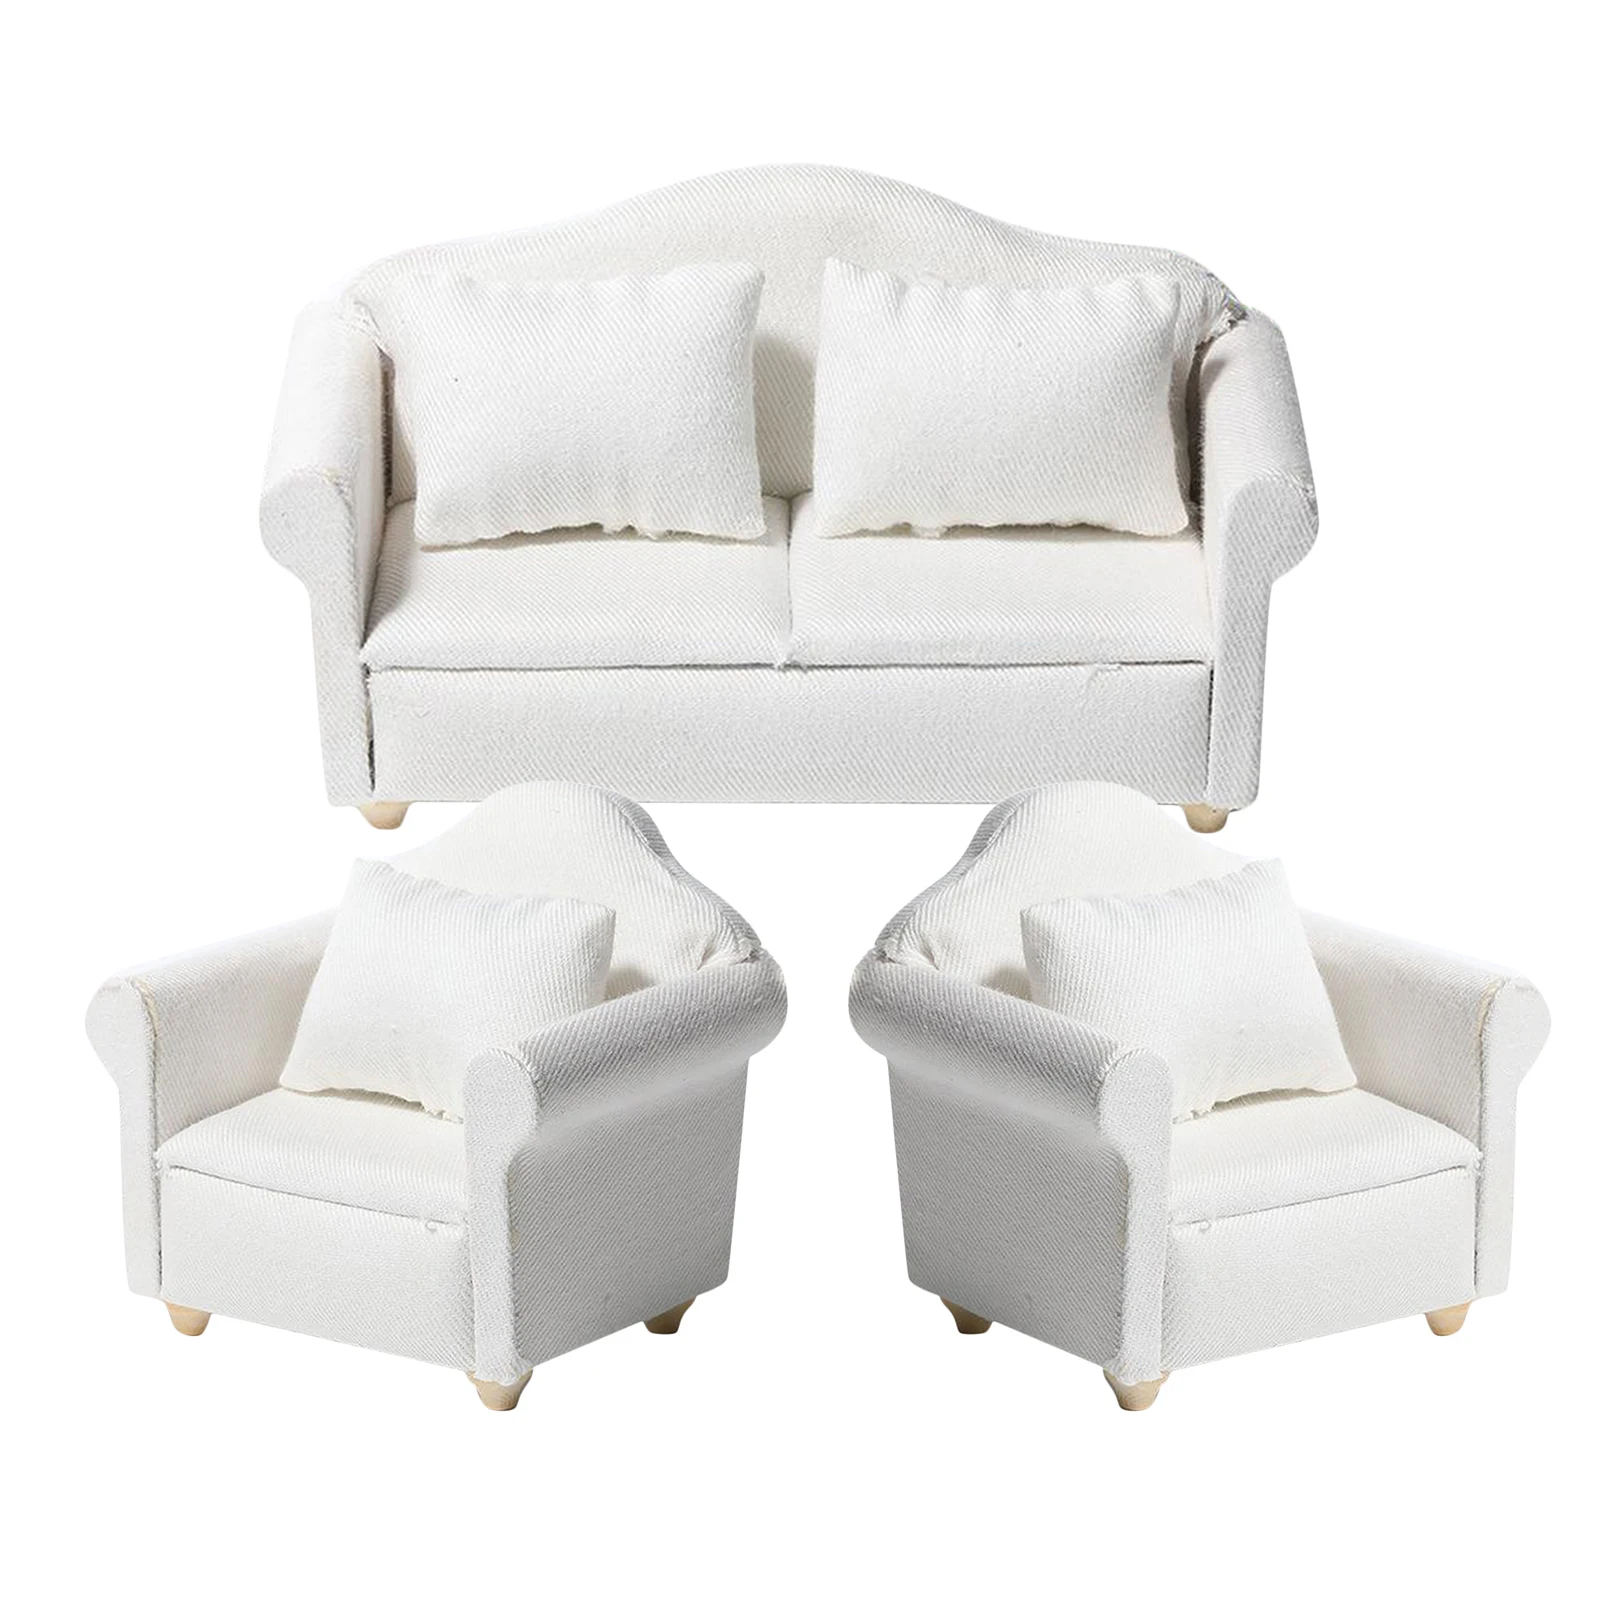 Dollhouse Sofa, Dolls House Furniture Sofa Couch Armchair Love Seat Set with Cushion Pillow - Pure White - 1/12 Scale